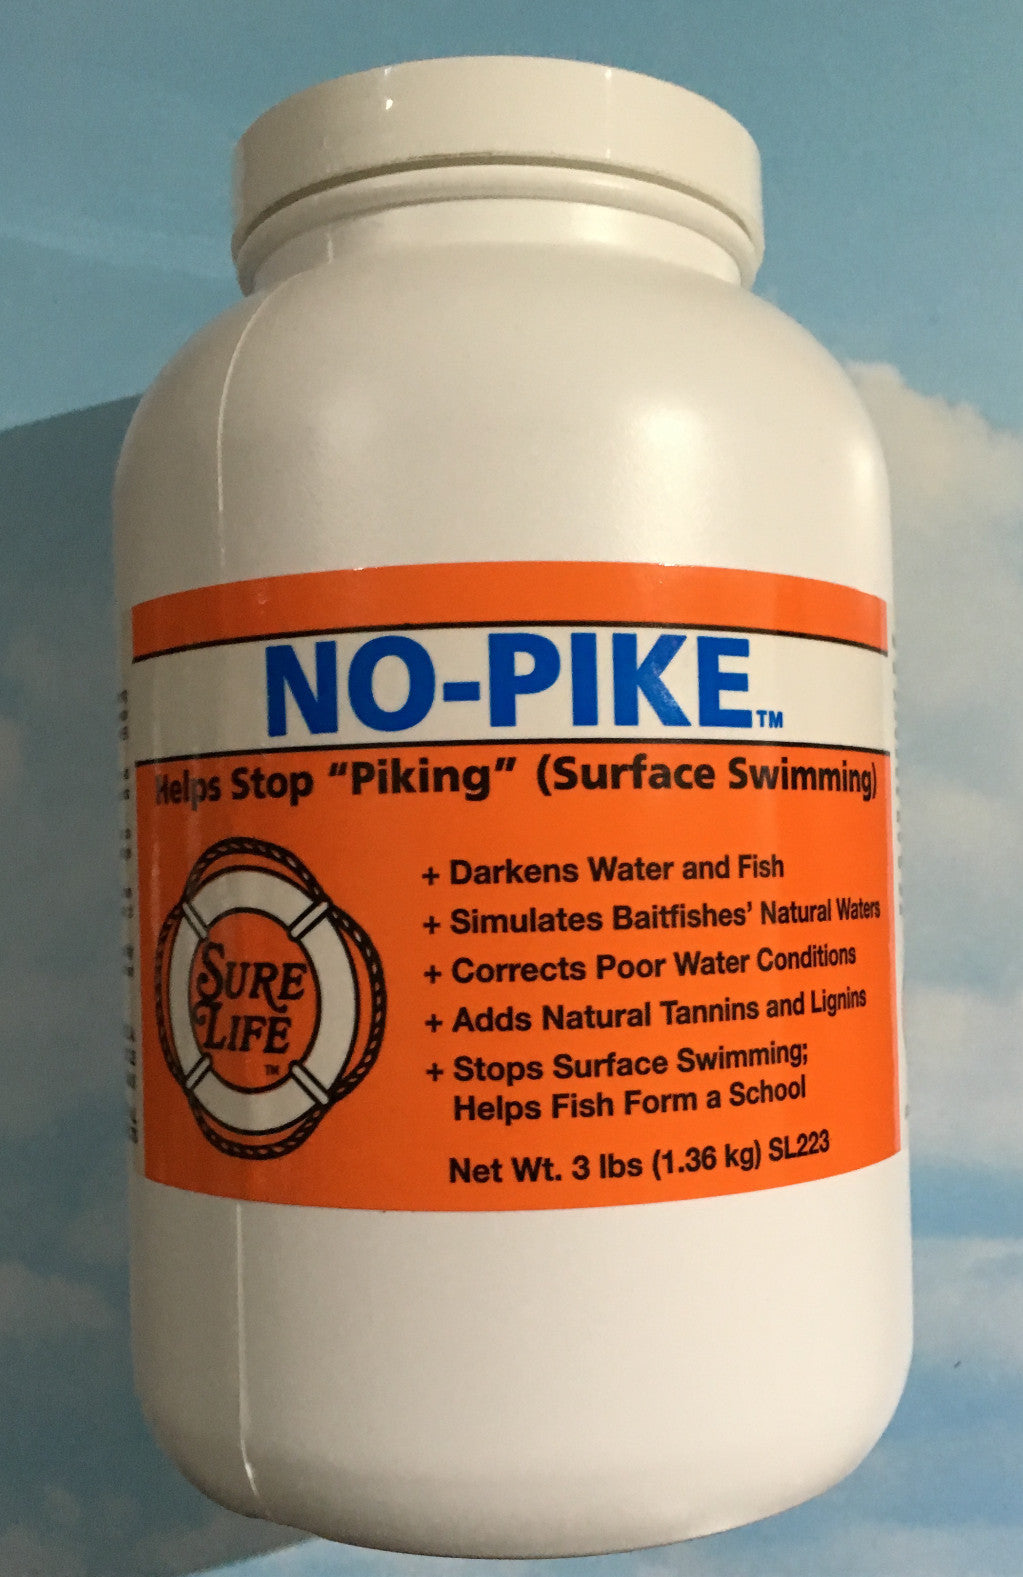 NO PIKE Stops Surface Swimming! By Sure Life – Fishing Products